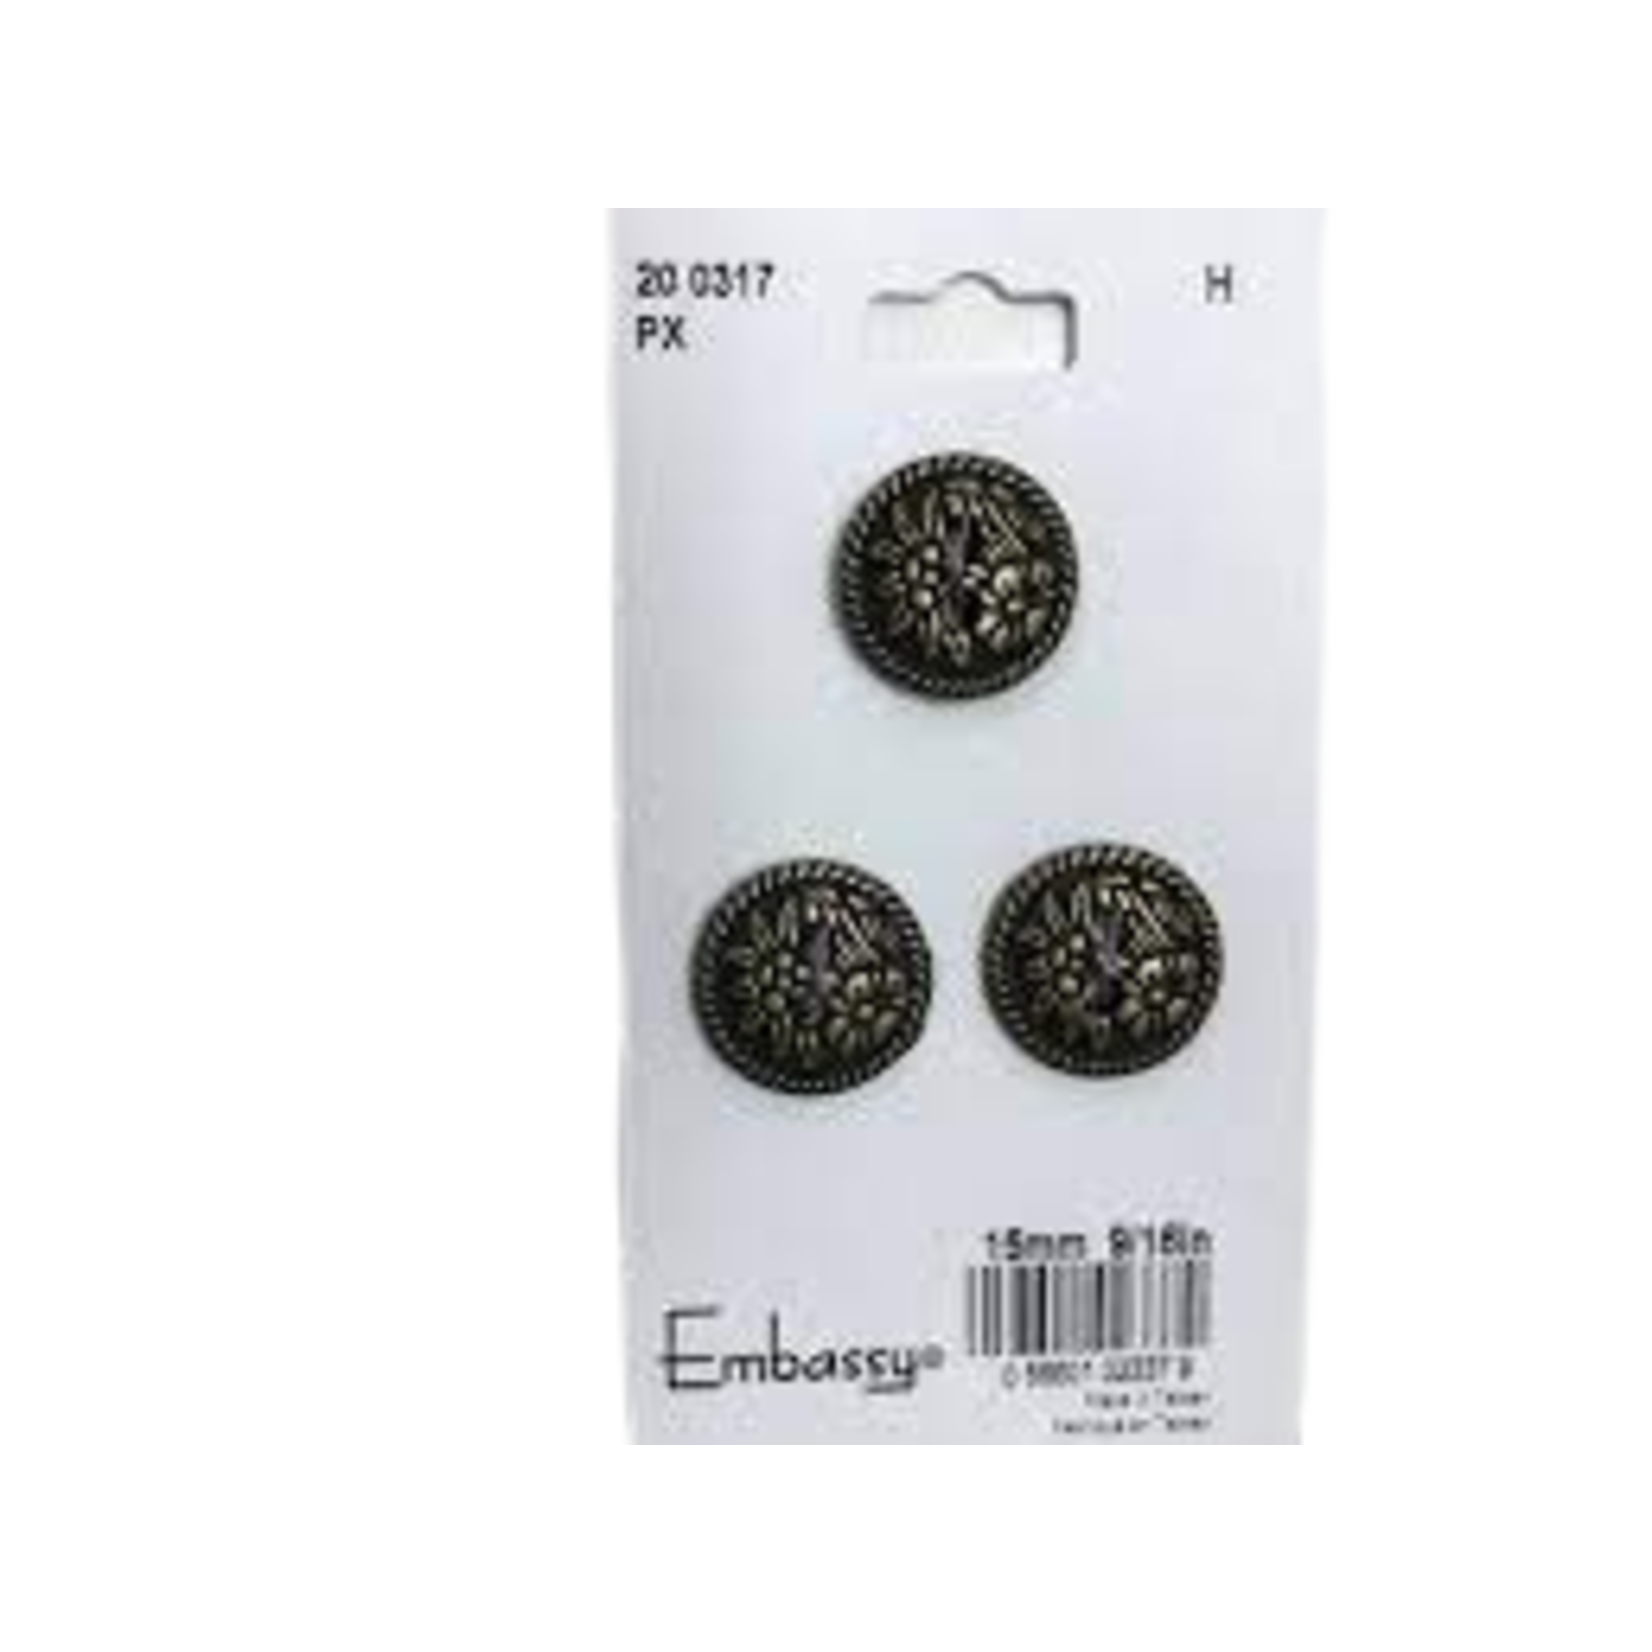 15MM BRASS AND BLACK BUTTONS - 2 HOLES -3PK